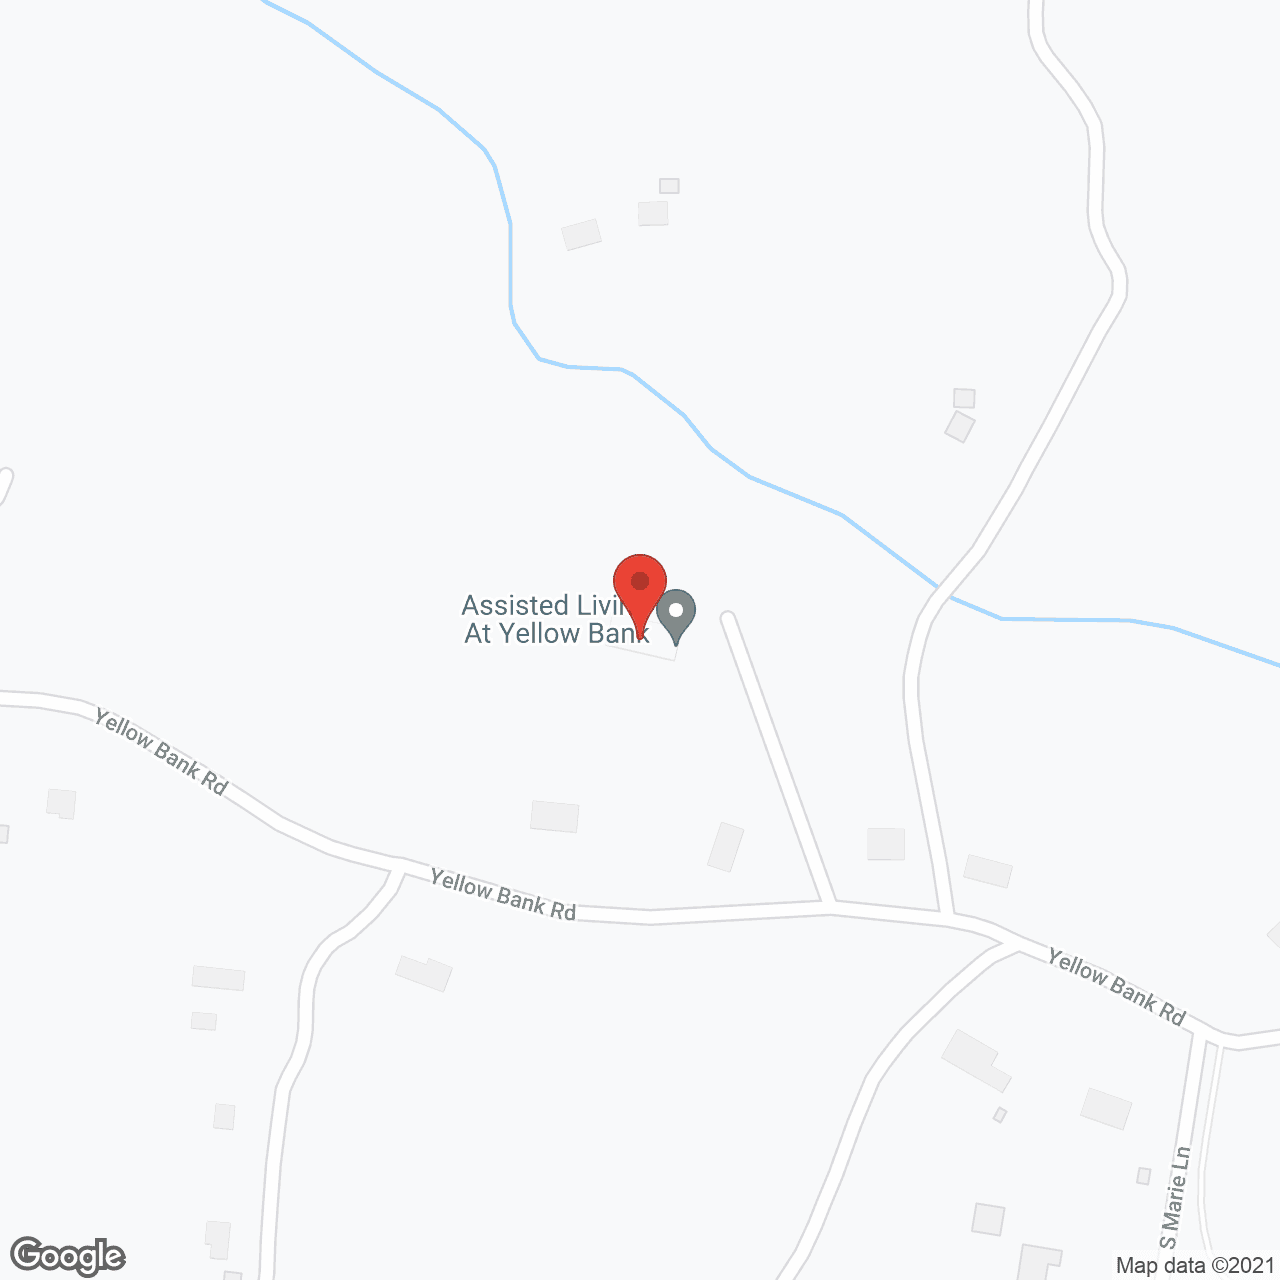 Assisted Living At Yellow Bank in google map